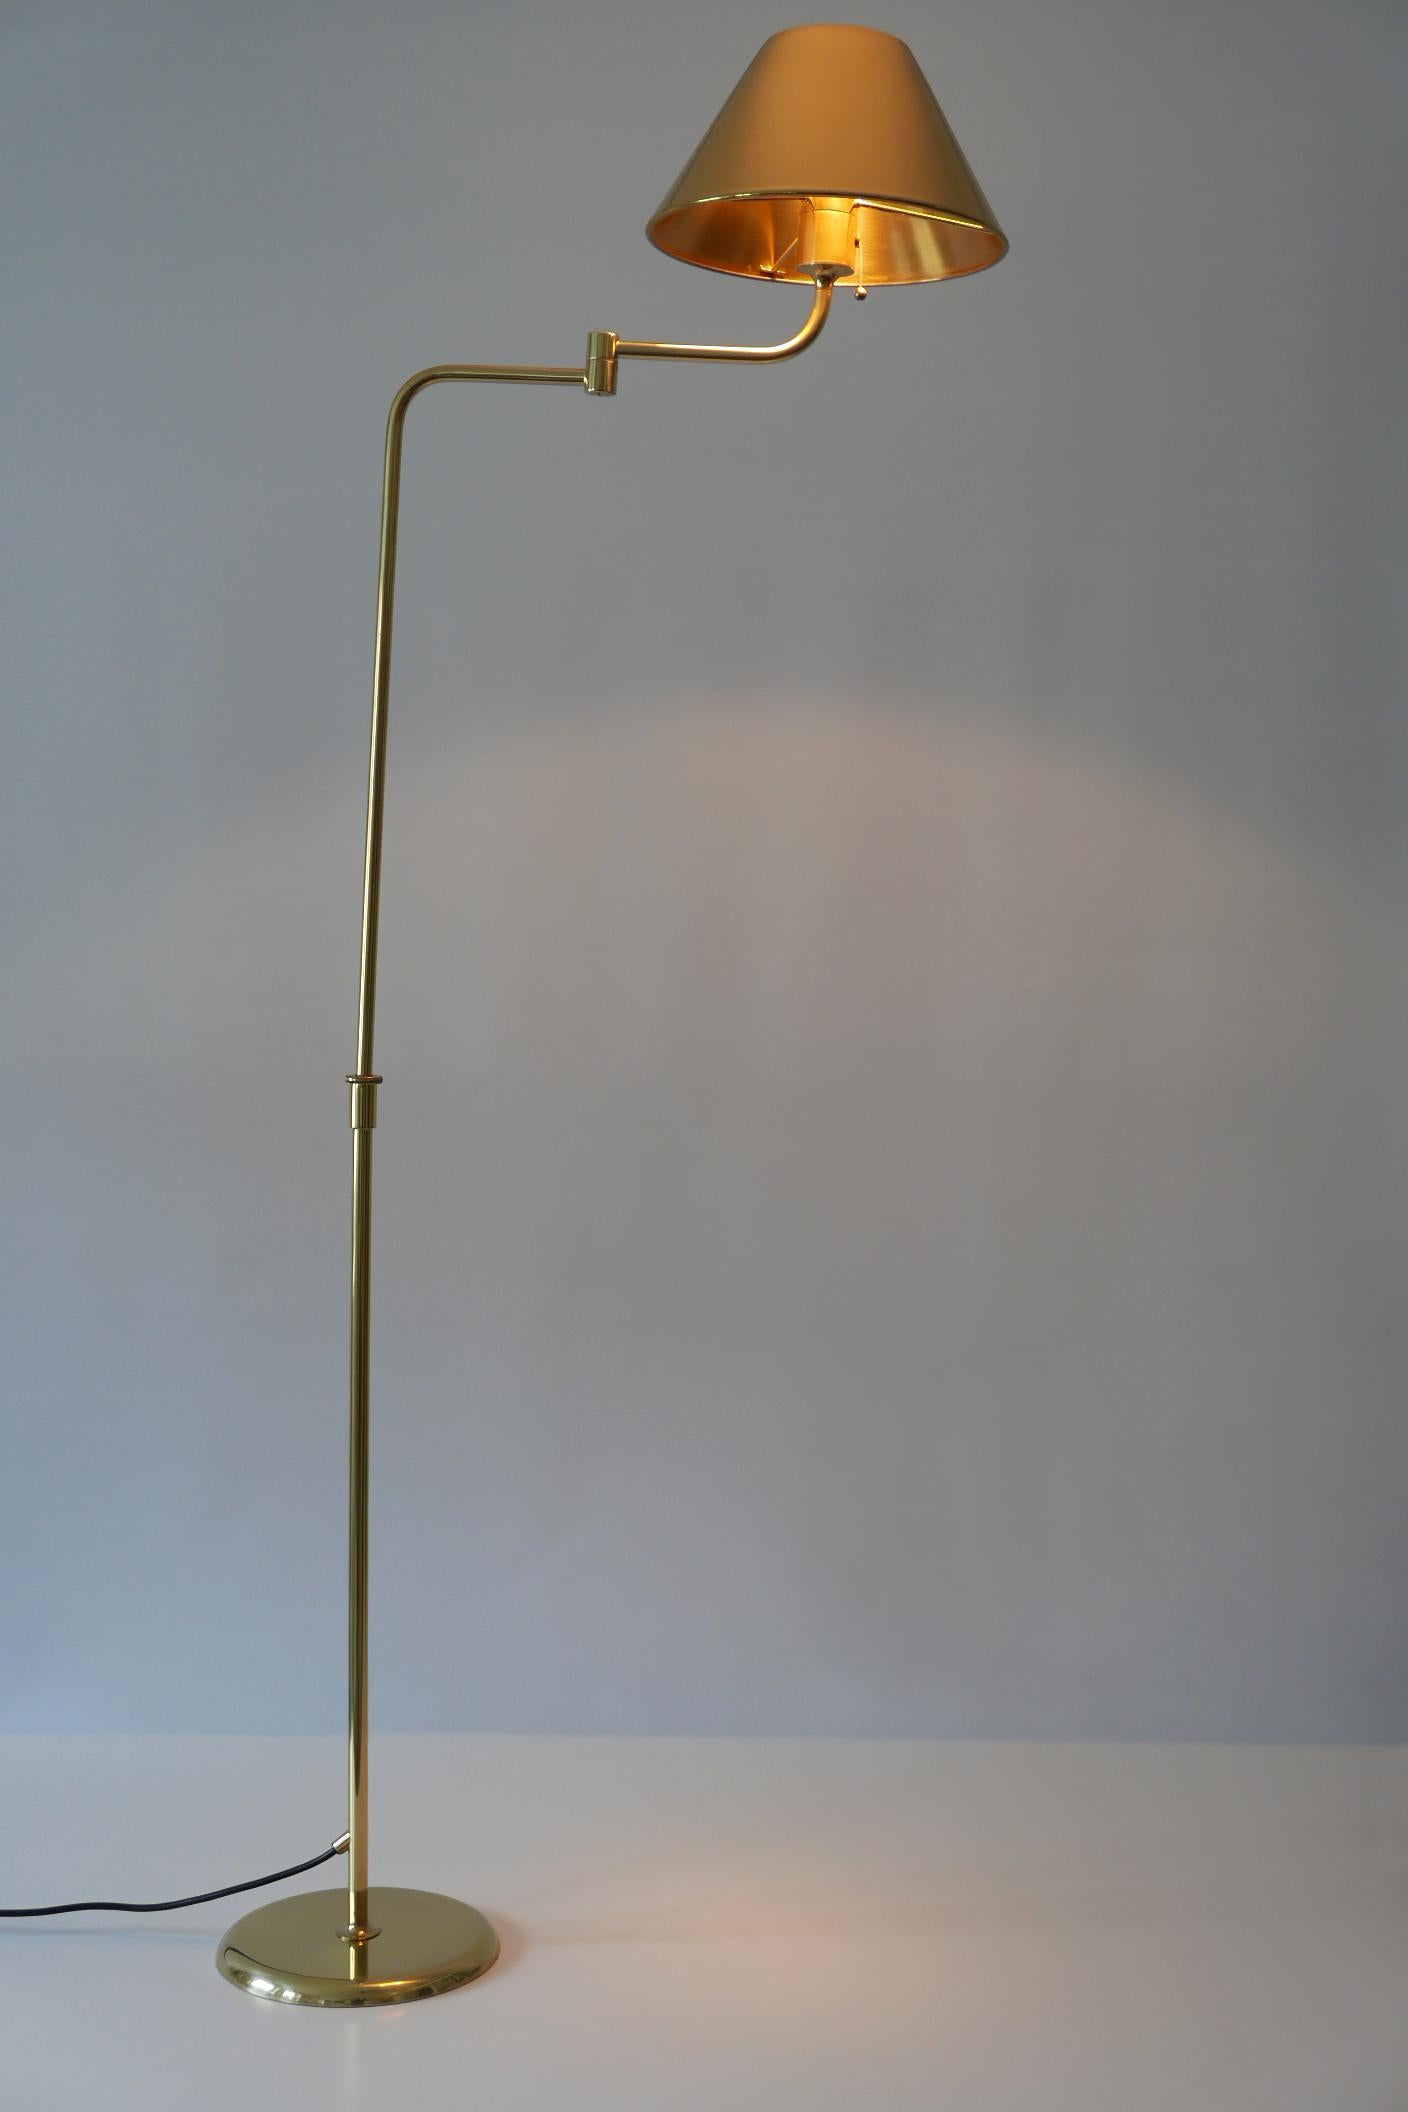 Articulated Brass Floor Lamp or Reading Light by Florian Schulz 1980s Germany 5